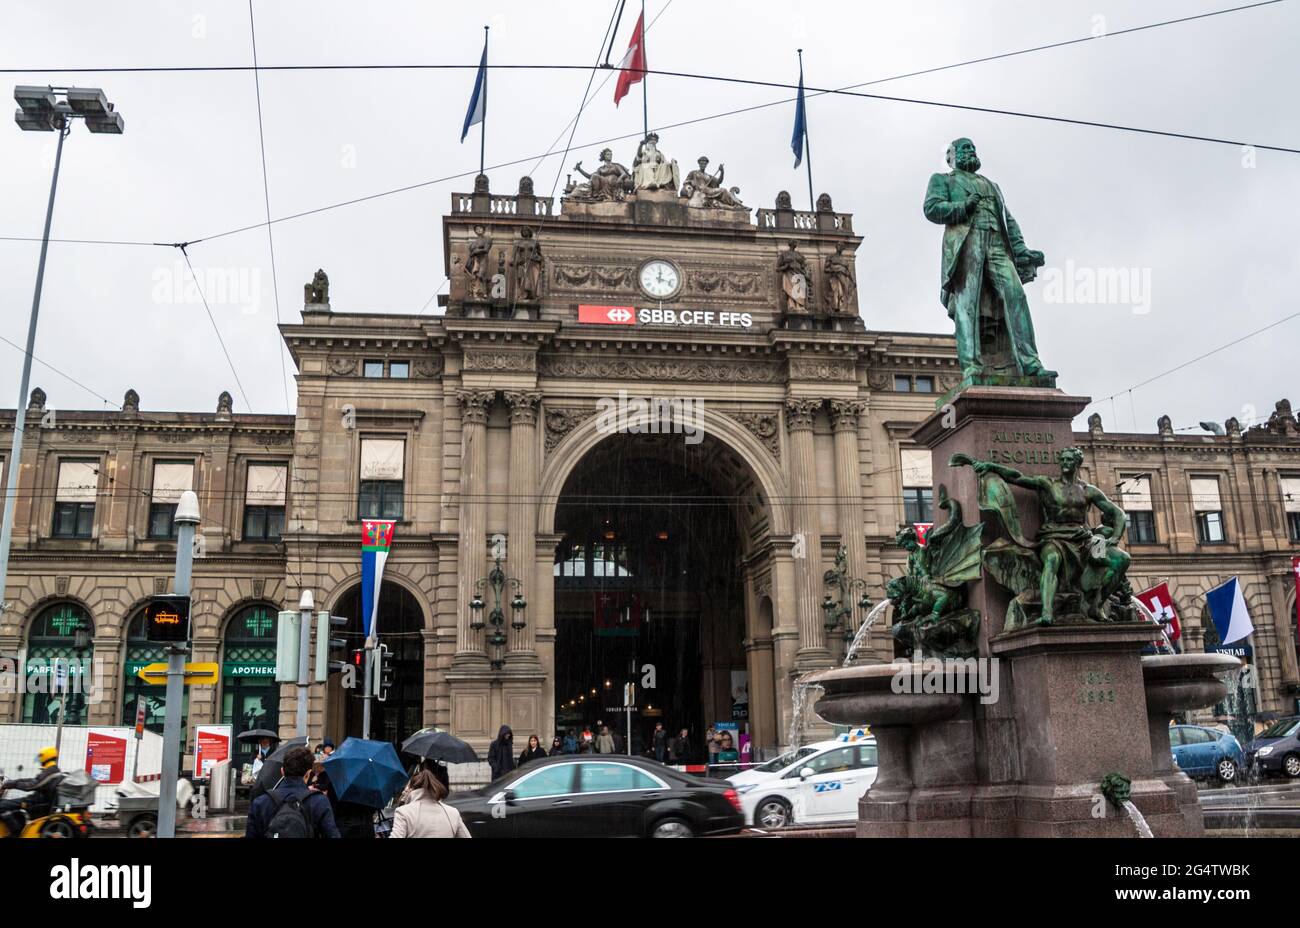 ZURICH - APRIL 28: View of a main railway station on April 28, 2014 in Zurich, Switzerland. Zurich is the largest city in Switzerland and the capital Stock Photo